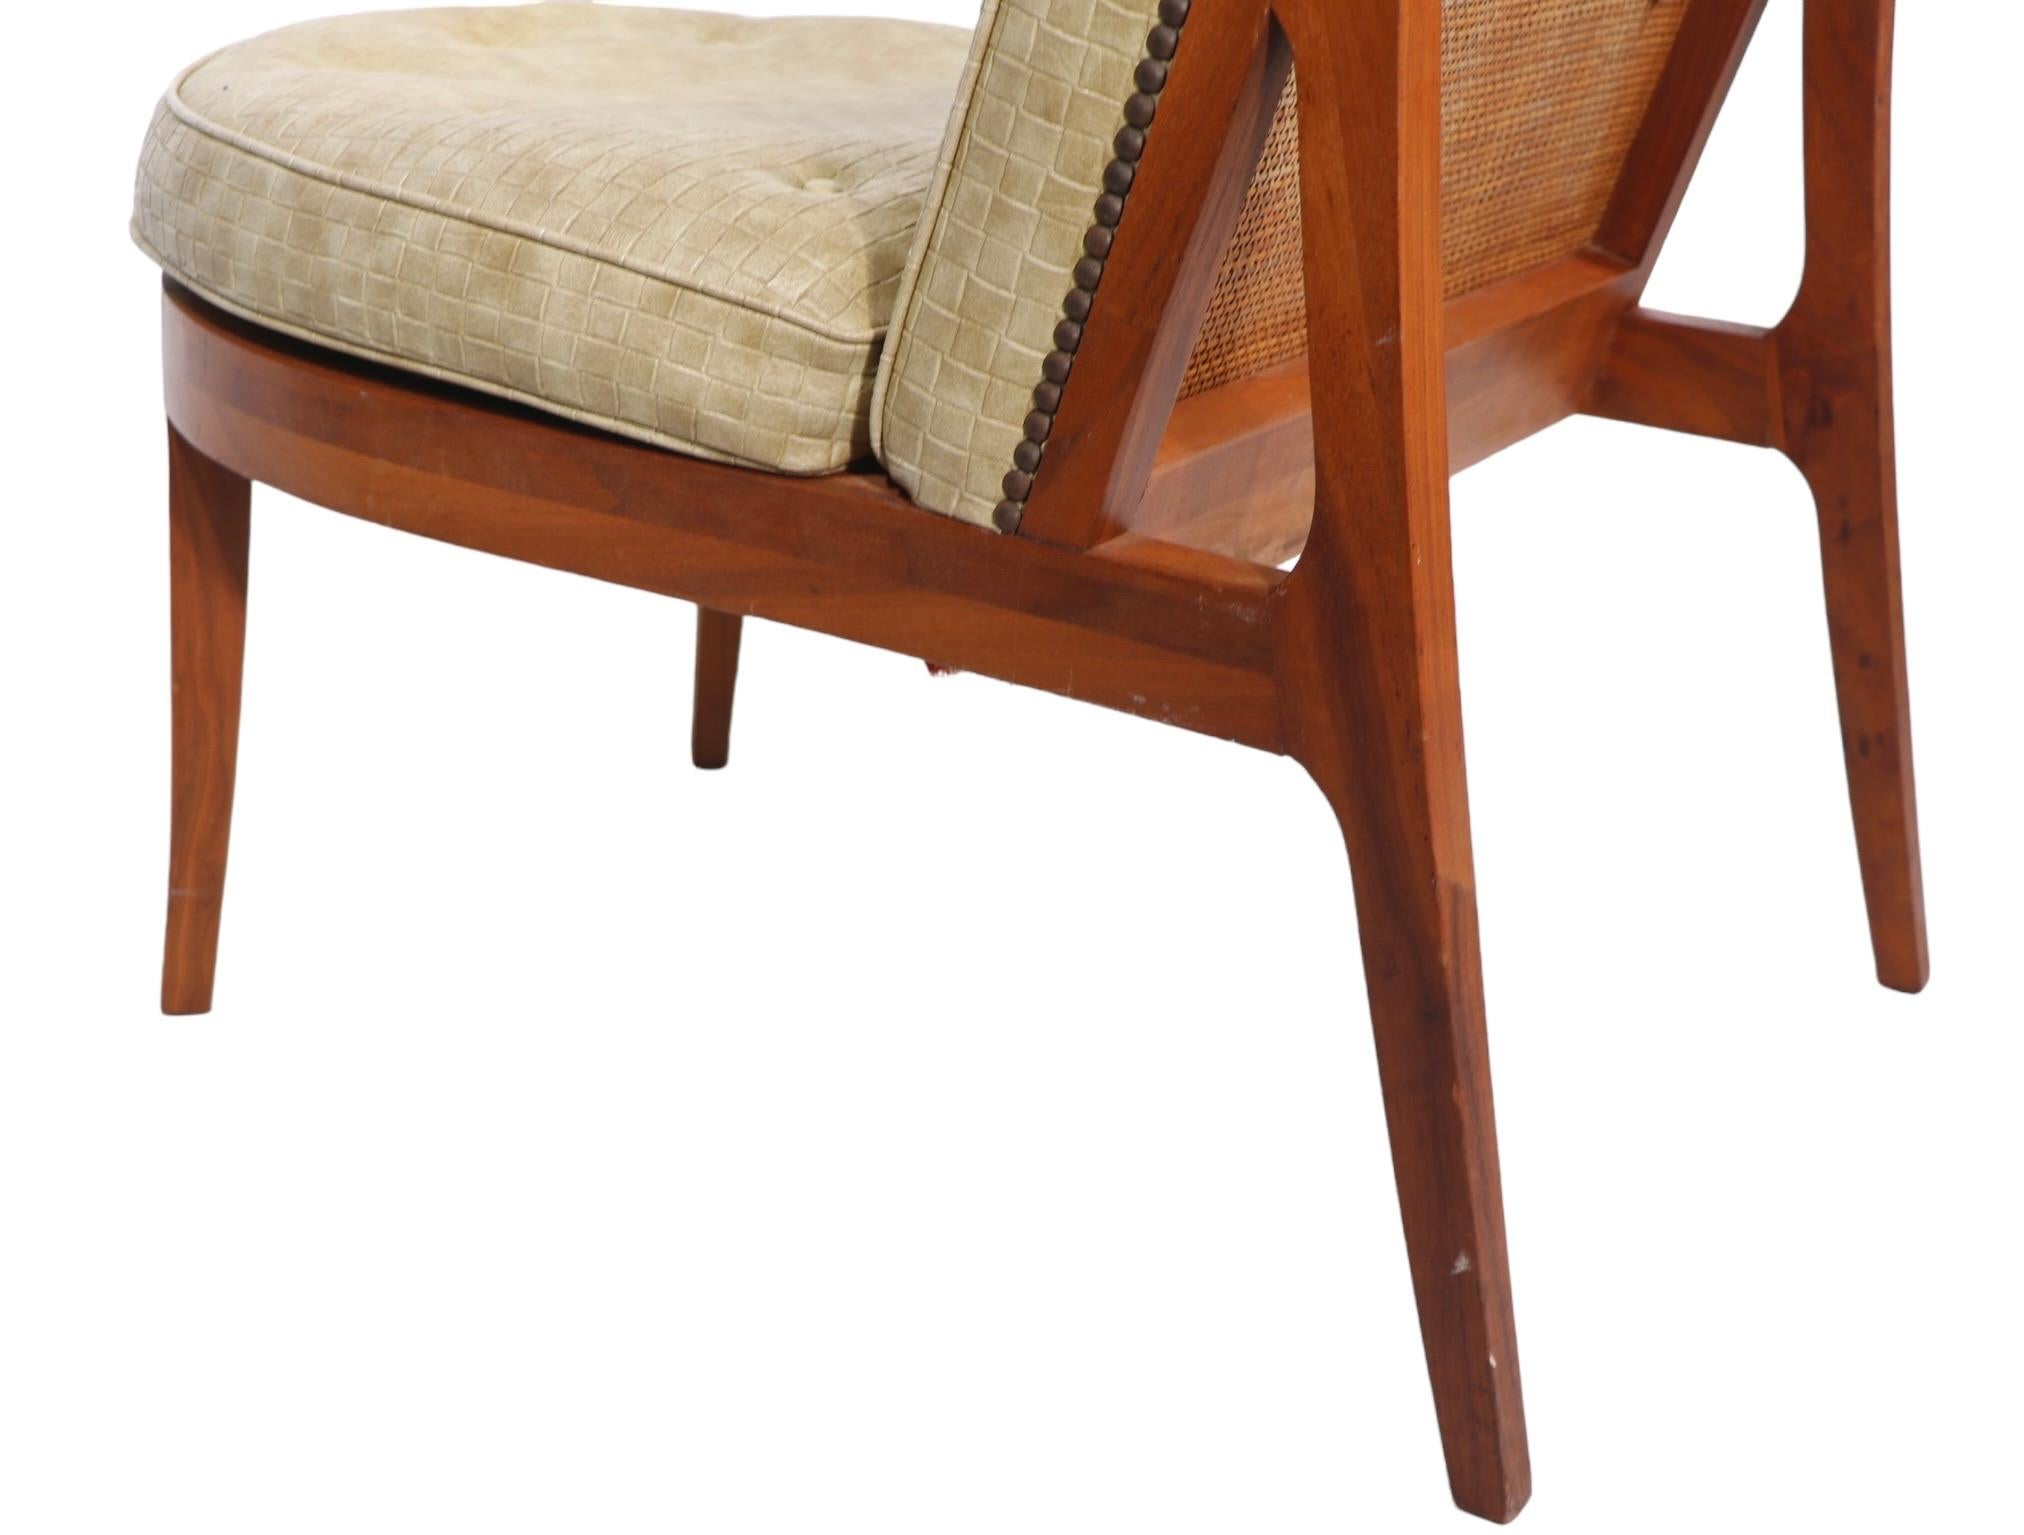 Américain Mid Century Lounge Chair after Wormley c 1950's en vente